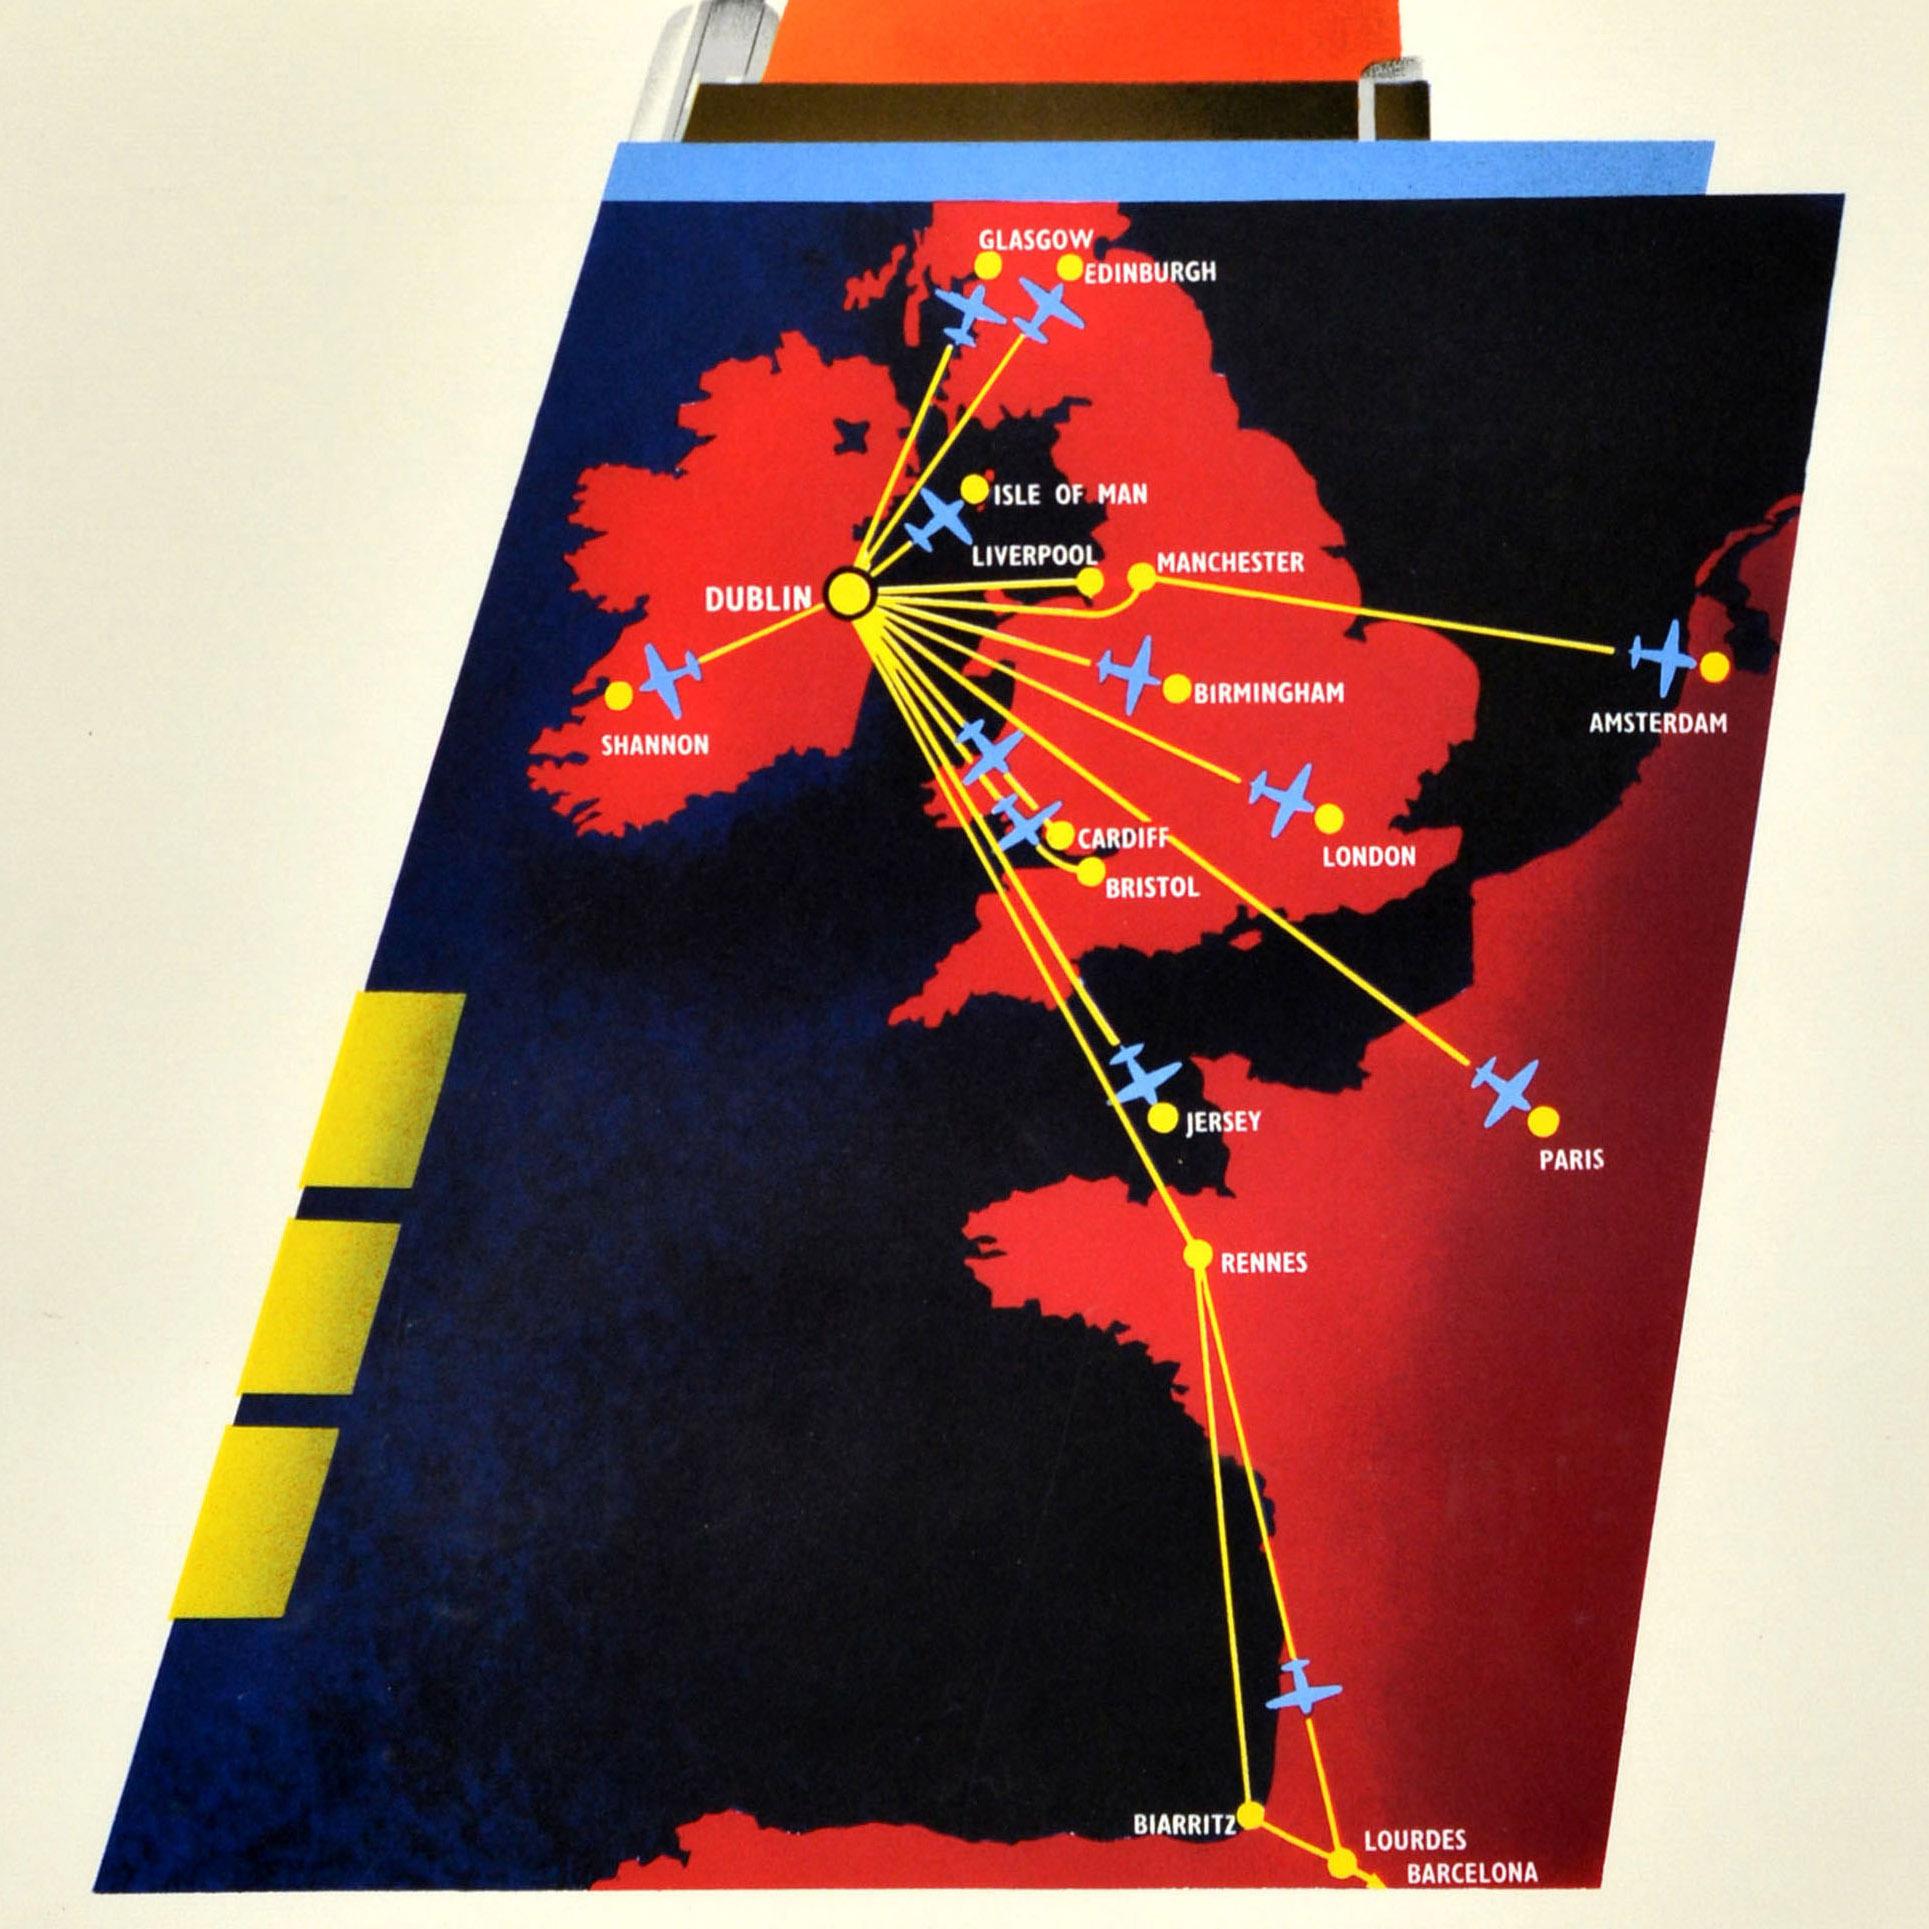 Original Vintage Travel Poster Fly Aer Lingus Travel The Easy Way Midcentury Art In Good Condition For Sale In London, GB